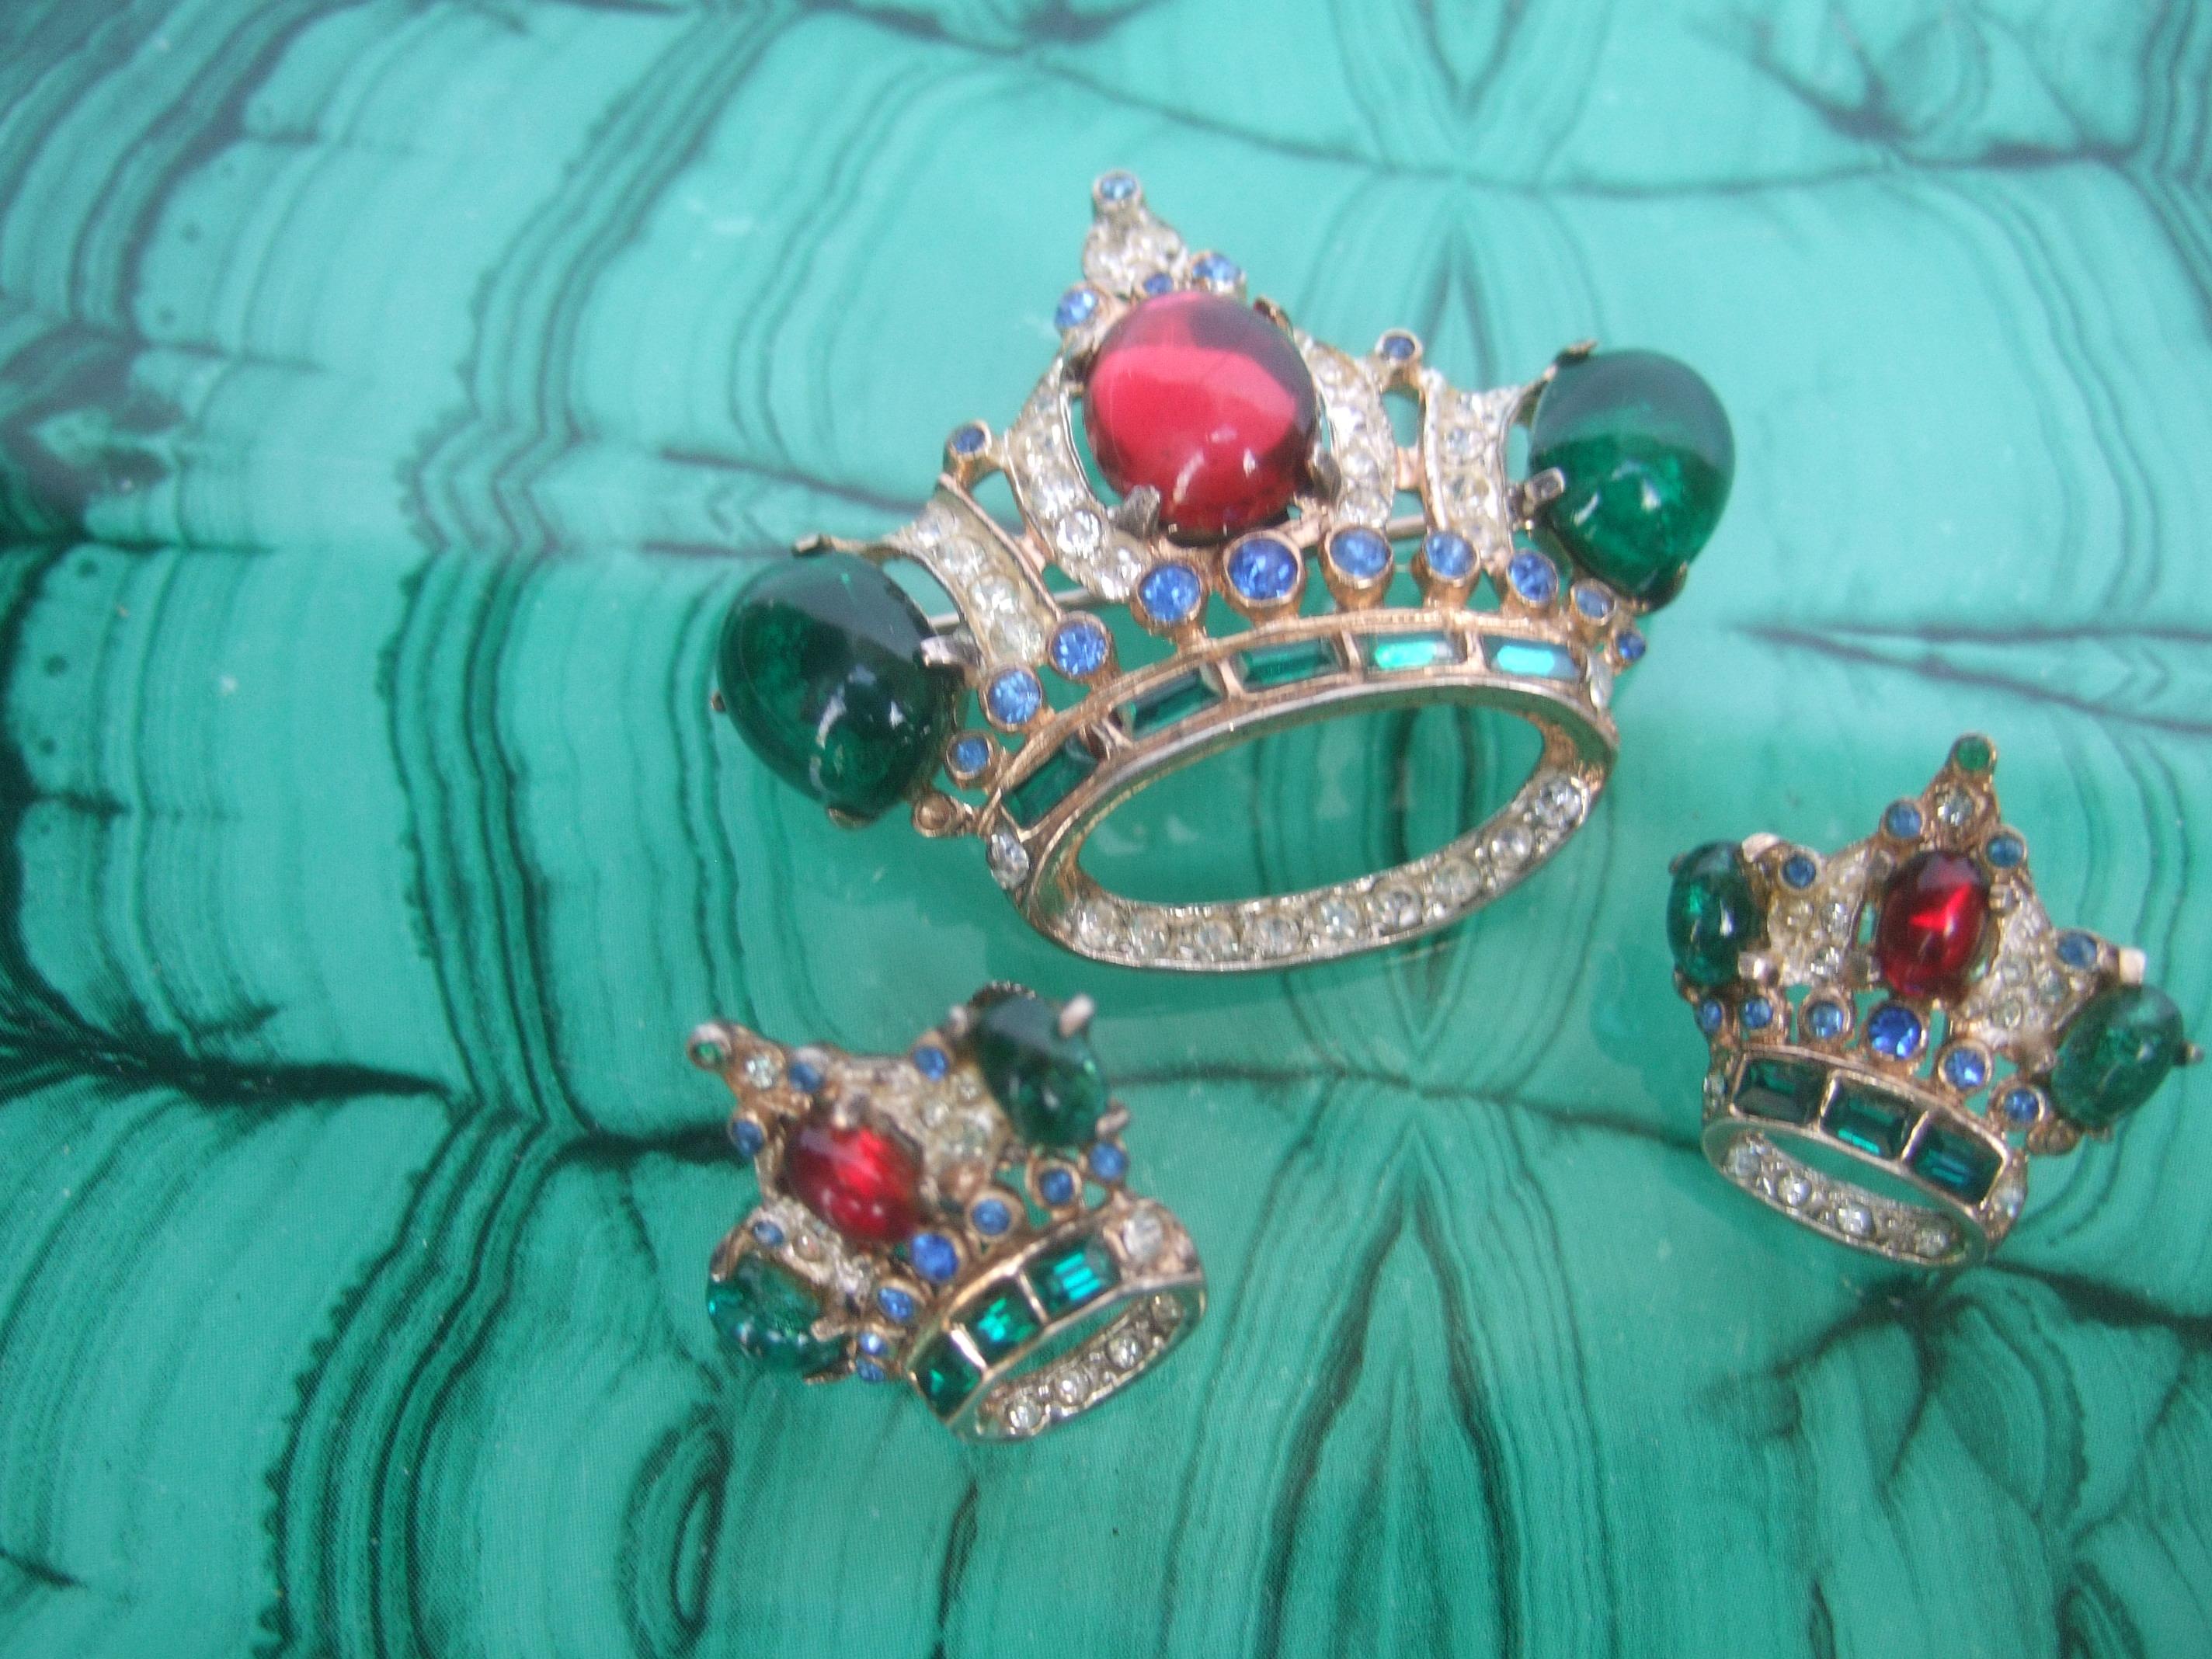 Coro Sterling gilt vermeil crown brooch & earrings set c 1950s
The elegant sterling crown brooch & scew back earrings are embellished jewel-tone glass cabochons combined with baguette crystals, clear & colored diamante crystals 

The crown brooch is